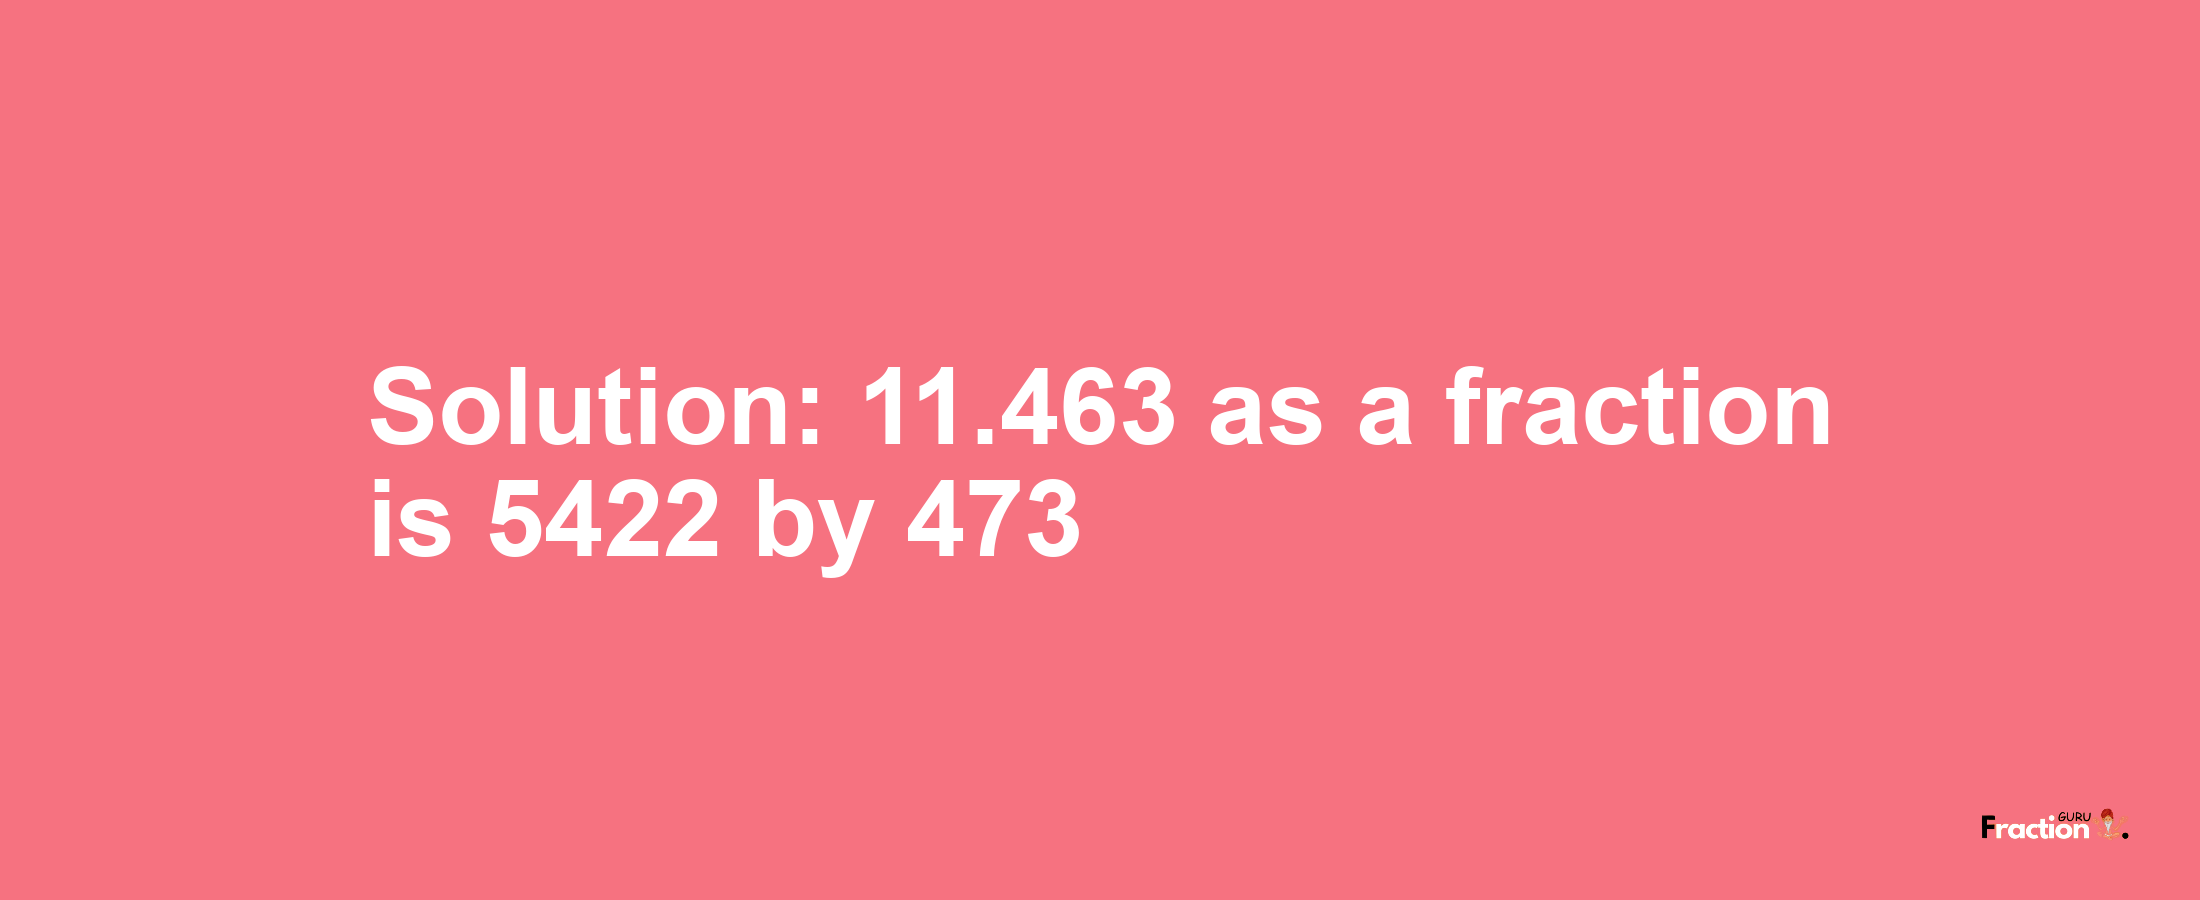 Solution:11.463 as a fraction is 5422/473